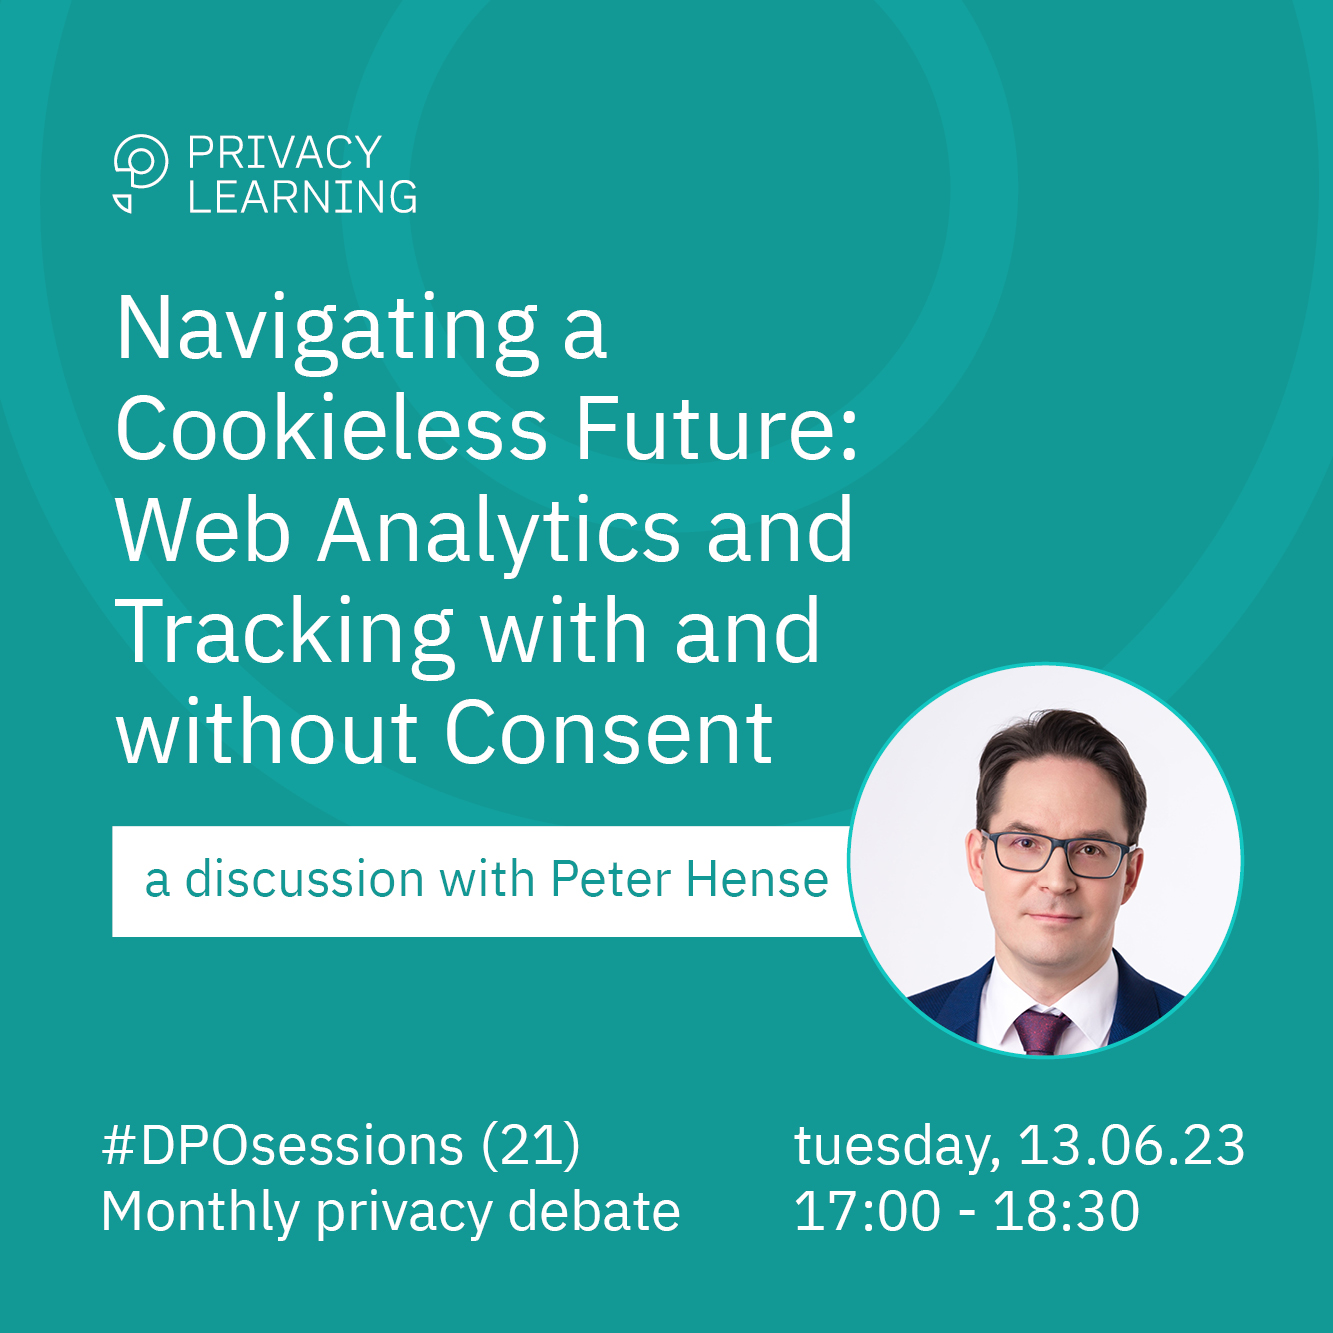 gdpr implications on cookie technologies